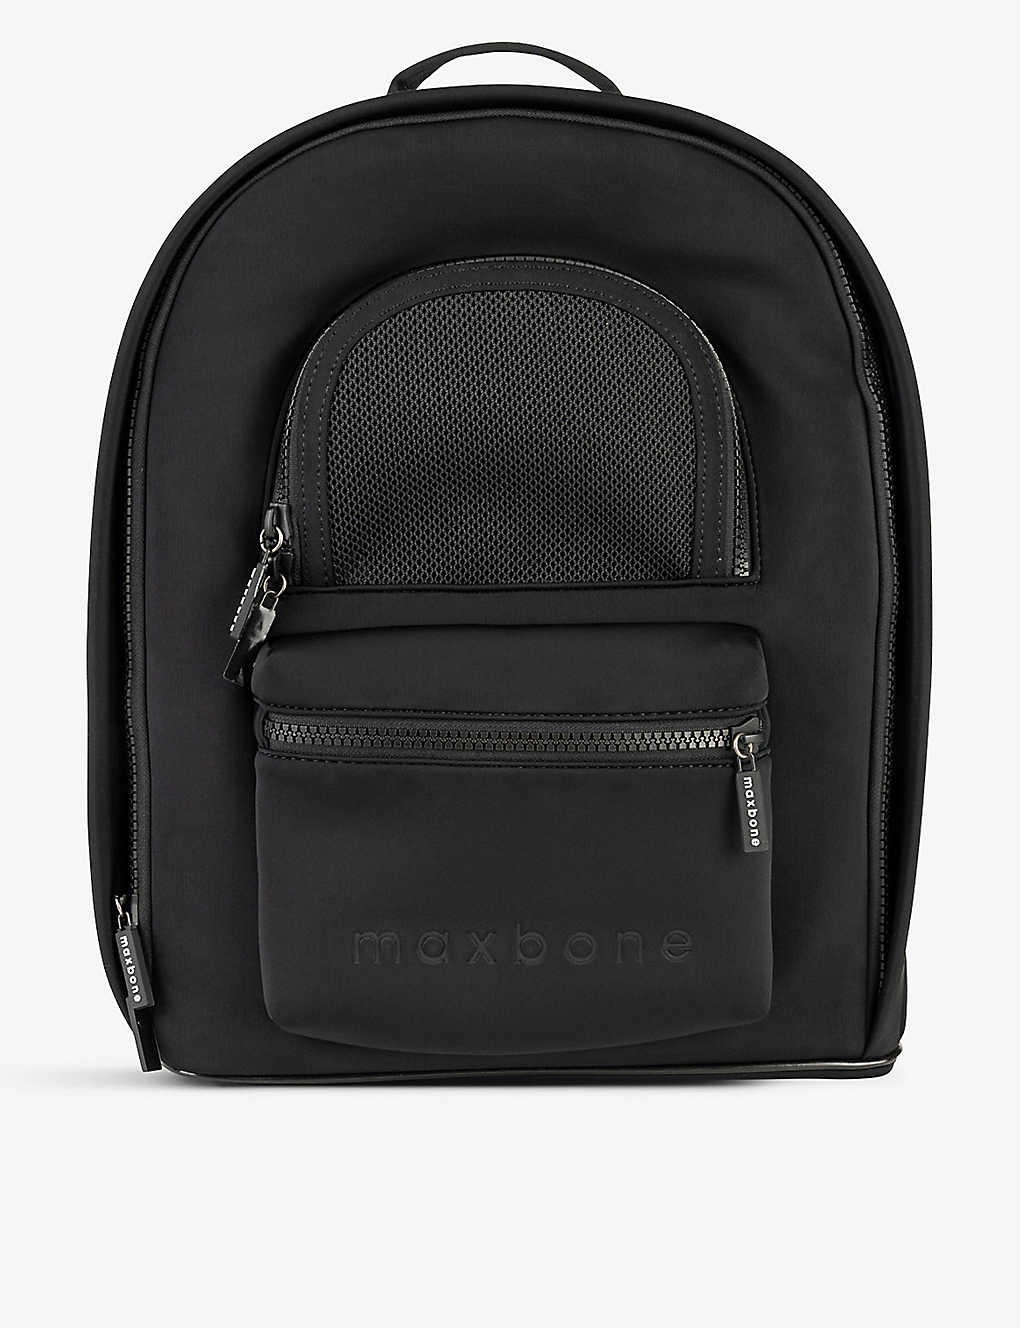 MAXBONE ゴー エブリウェア ペットキャリアー バックパック Go Everywhere pet carrier backpack